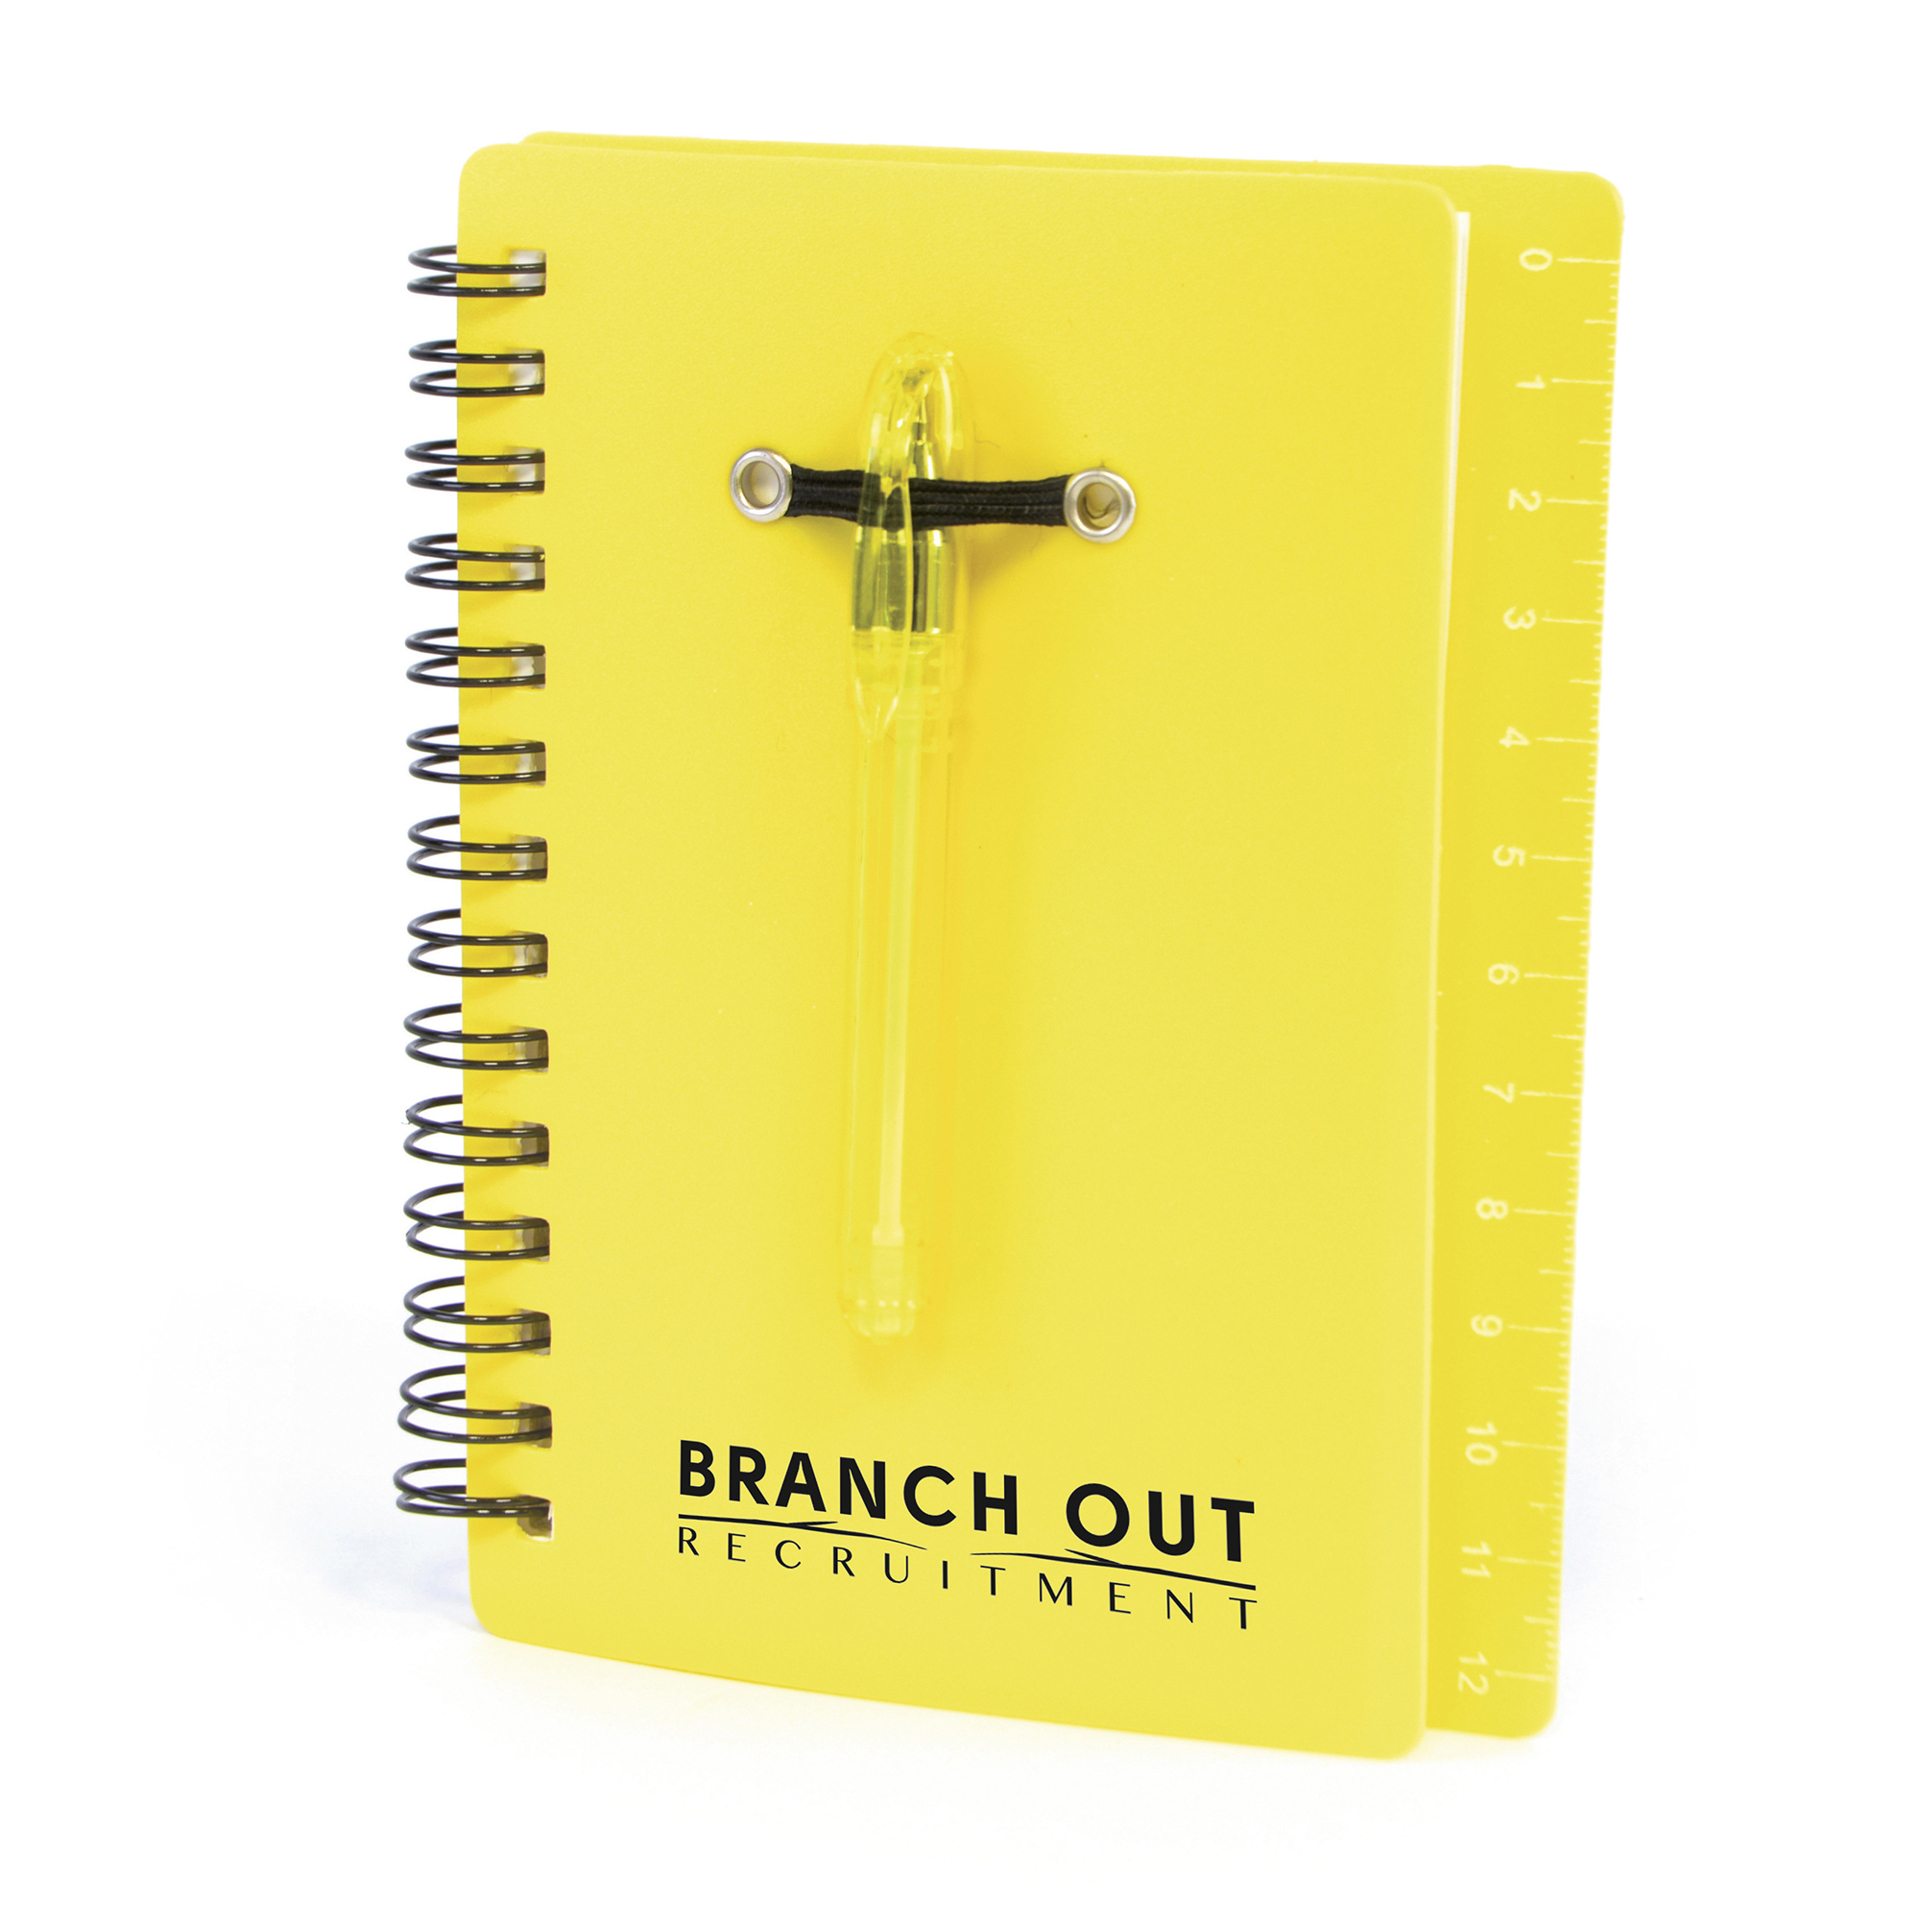 Spiral bound flexible yellow plastic covered notebook with matching ball pen with back cover ruler